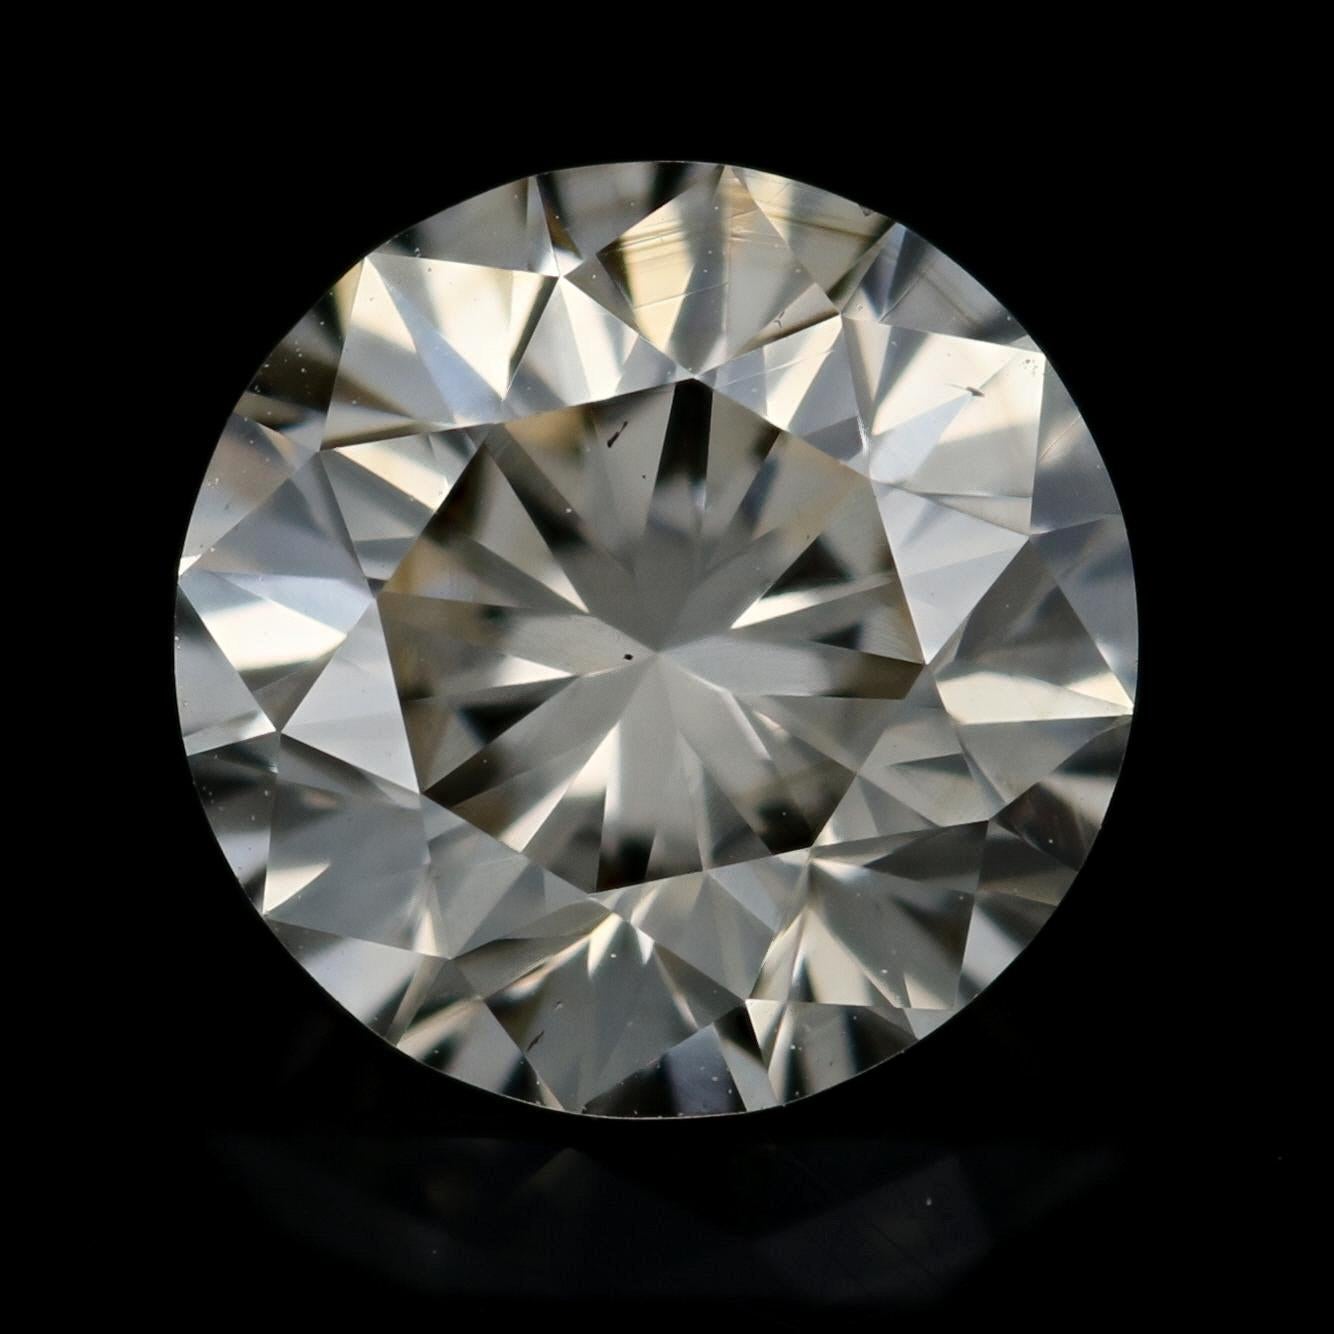 Weight: 1.30ct
Cut: Round Brilliant 
Color: S - T Light Brown   
Clarity: VS2 
Dimensions (mm): 6.85 - 6.91 x 4.50 

GIA Report Number: 6157215331

Condition: New  

Please check out the enlarged pictures.

Thank you for taking the time to read our